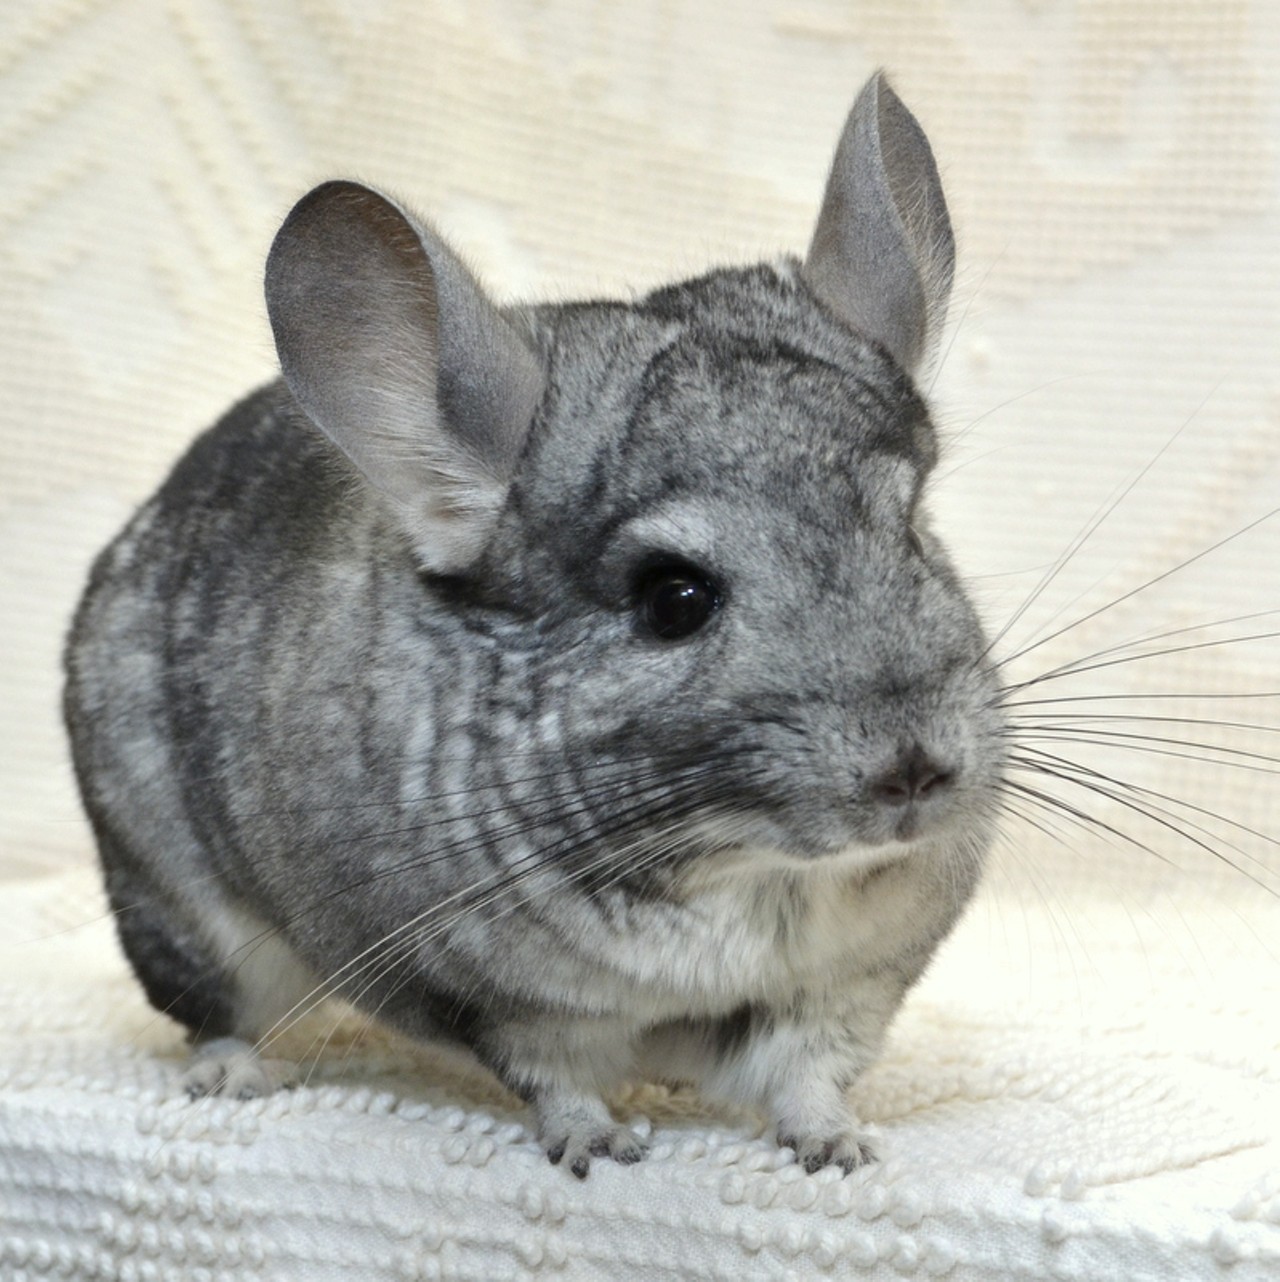 NAME: Chip
GENDER: Male
BREED: Chinchilla
AGE: 1 year
WEIGHT: 
SPECIAL CONSIDERATIONS: Prefers older children onlyv
REASON I CAME TO MHS: Owner surrender
LOCATION: Berman Center for Animal Care in Westland
ID NUMBER: 864927